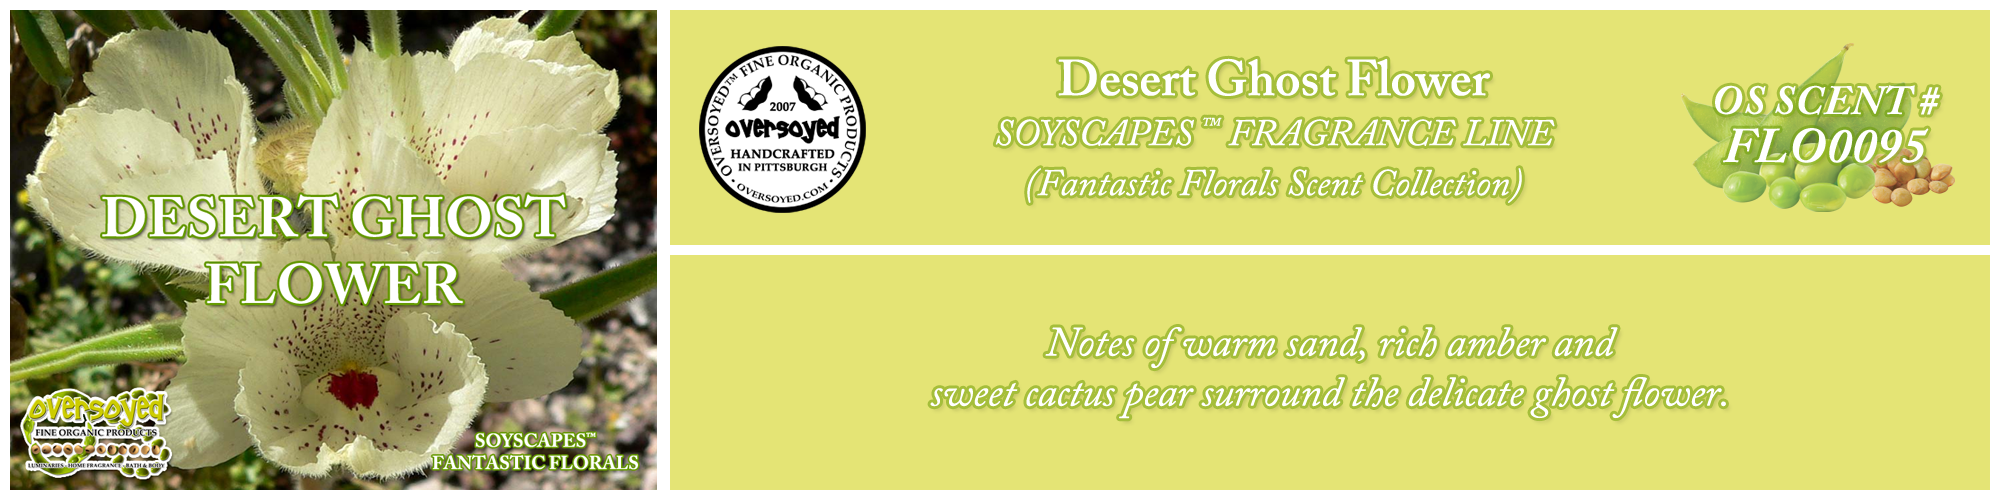 Desert Ghost Flower Handcrafted Products Collection